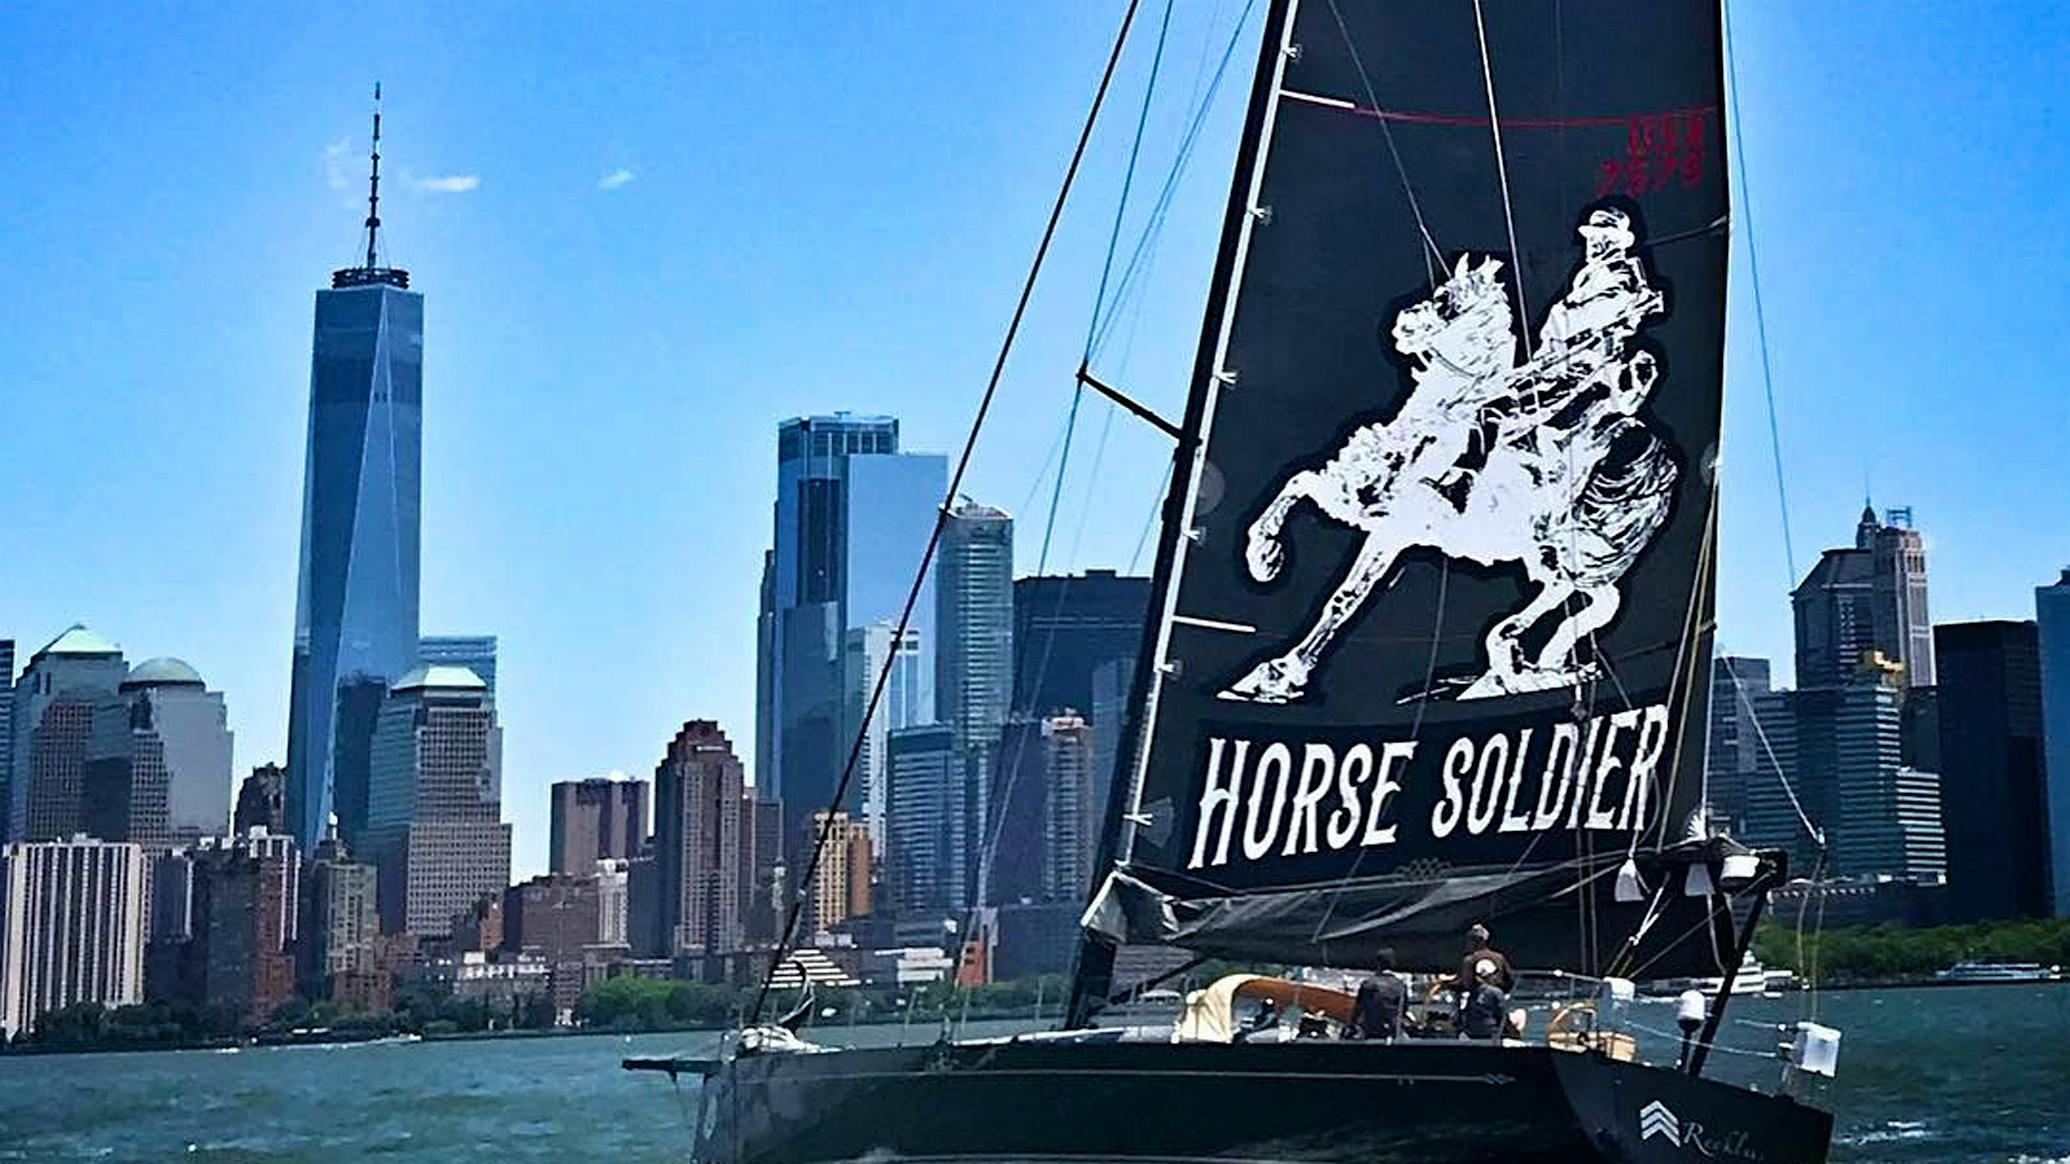 The Green Berets of Horse Soldier set sail around New York City, having learned the art of boating as another post-war journey.